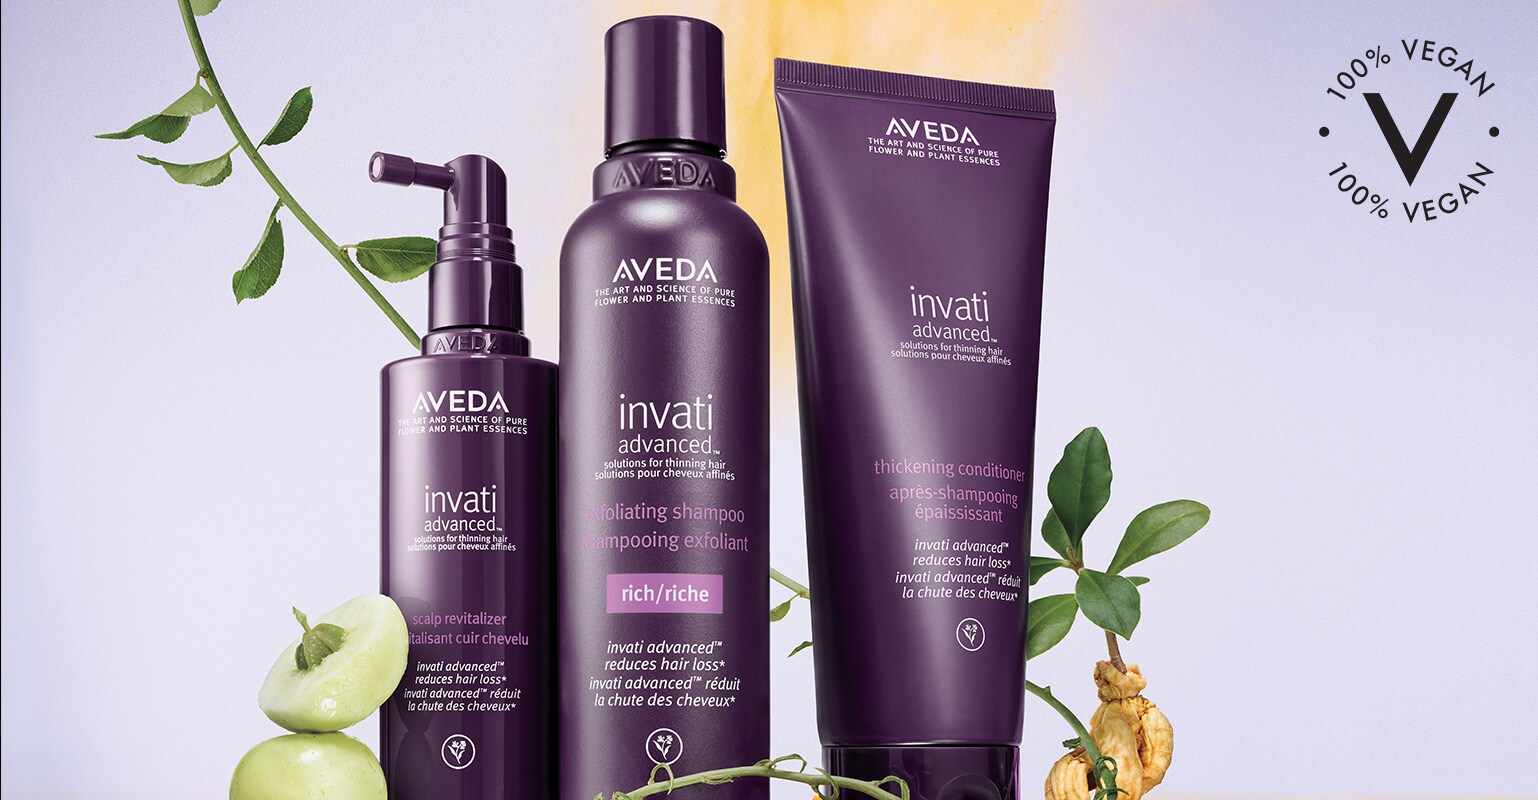 Reduce hair loss by 53% with invati advanced 3-step system